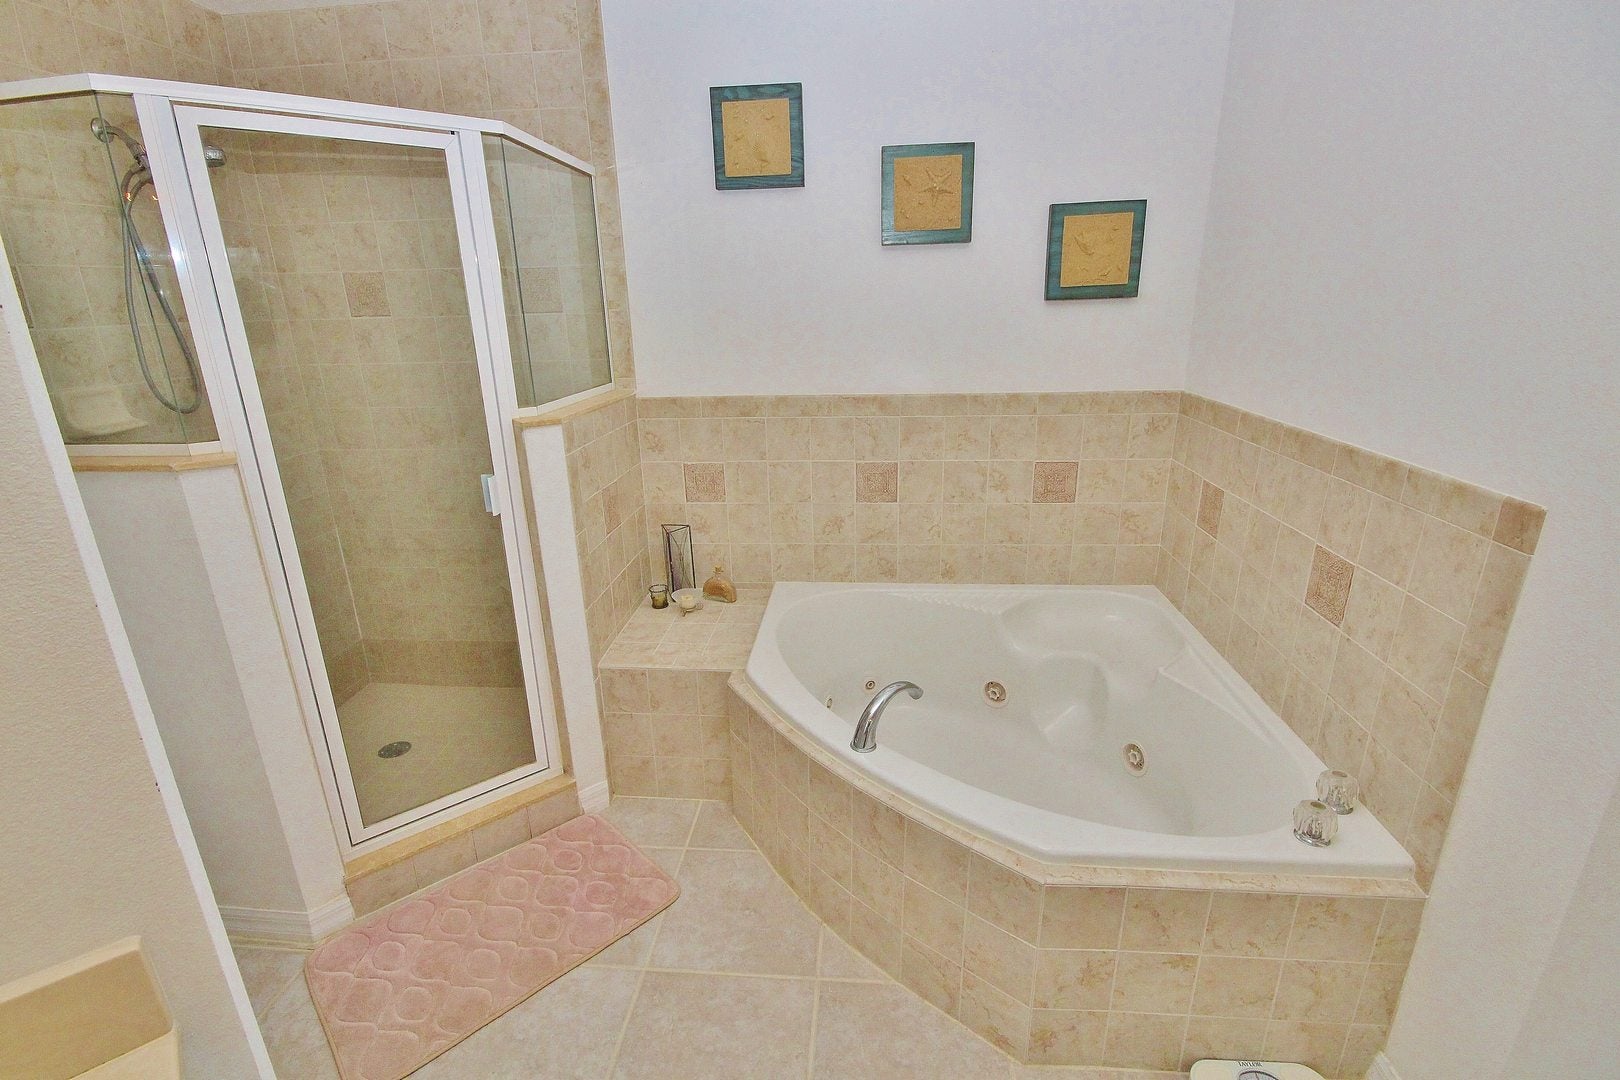 Shower & tub in primary bathroom